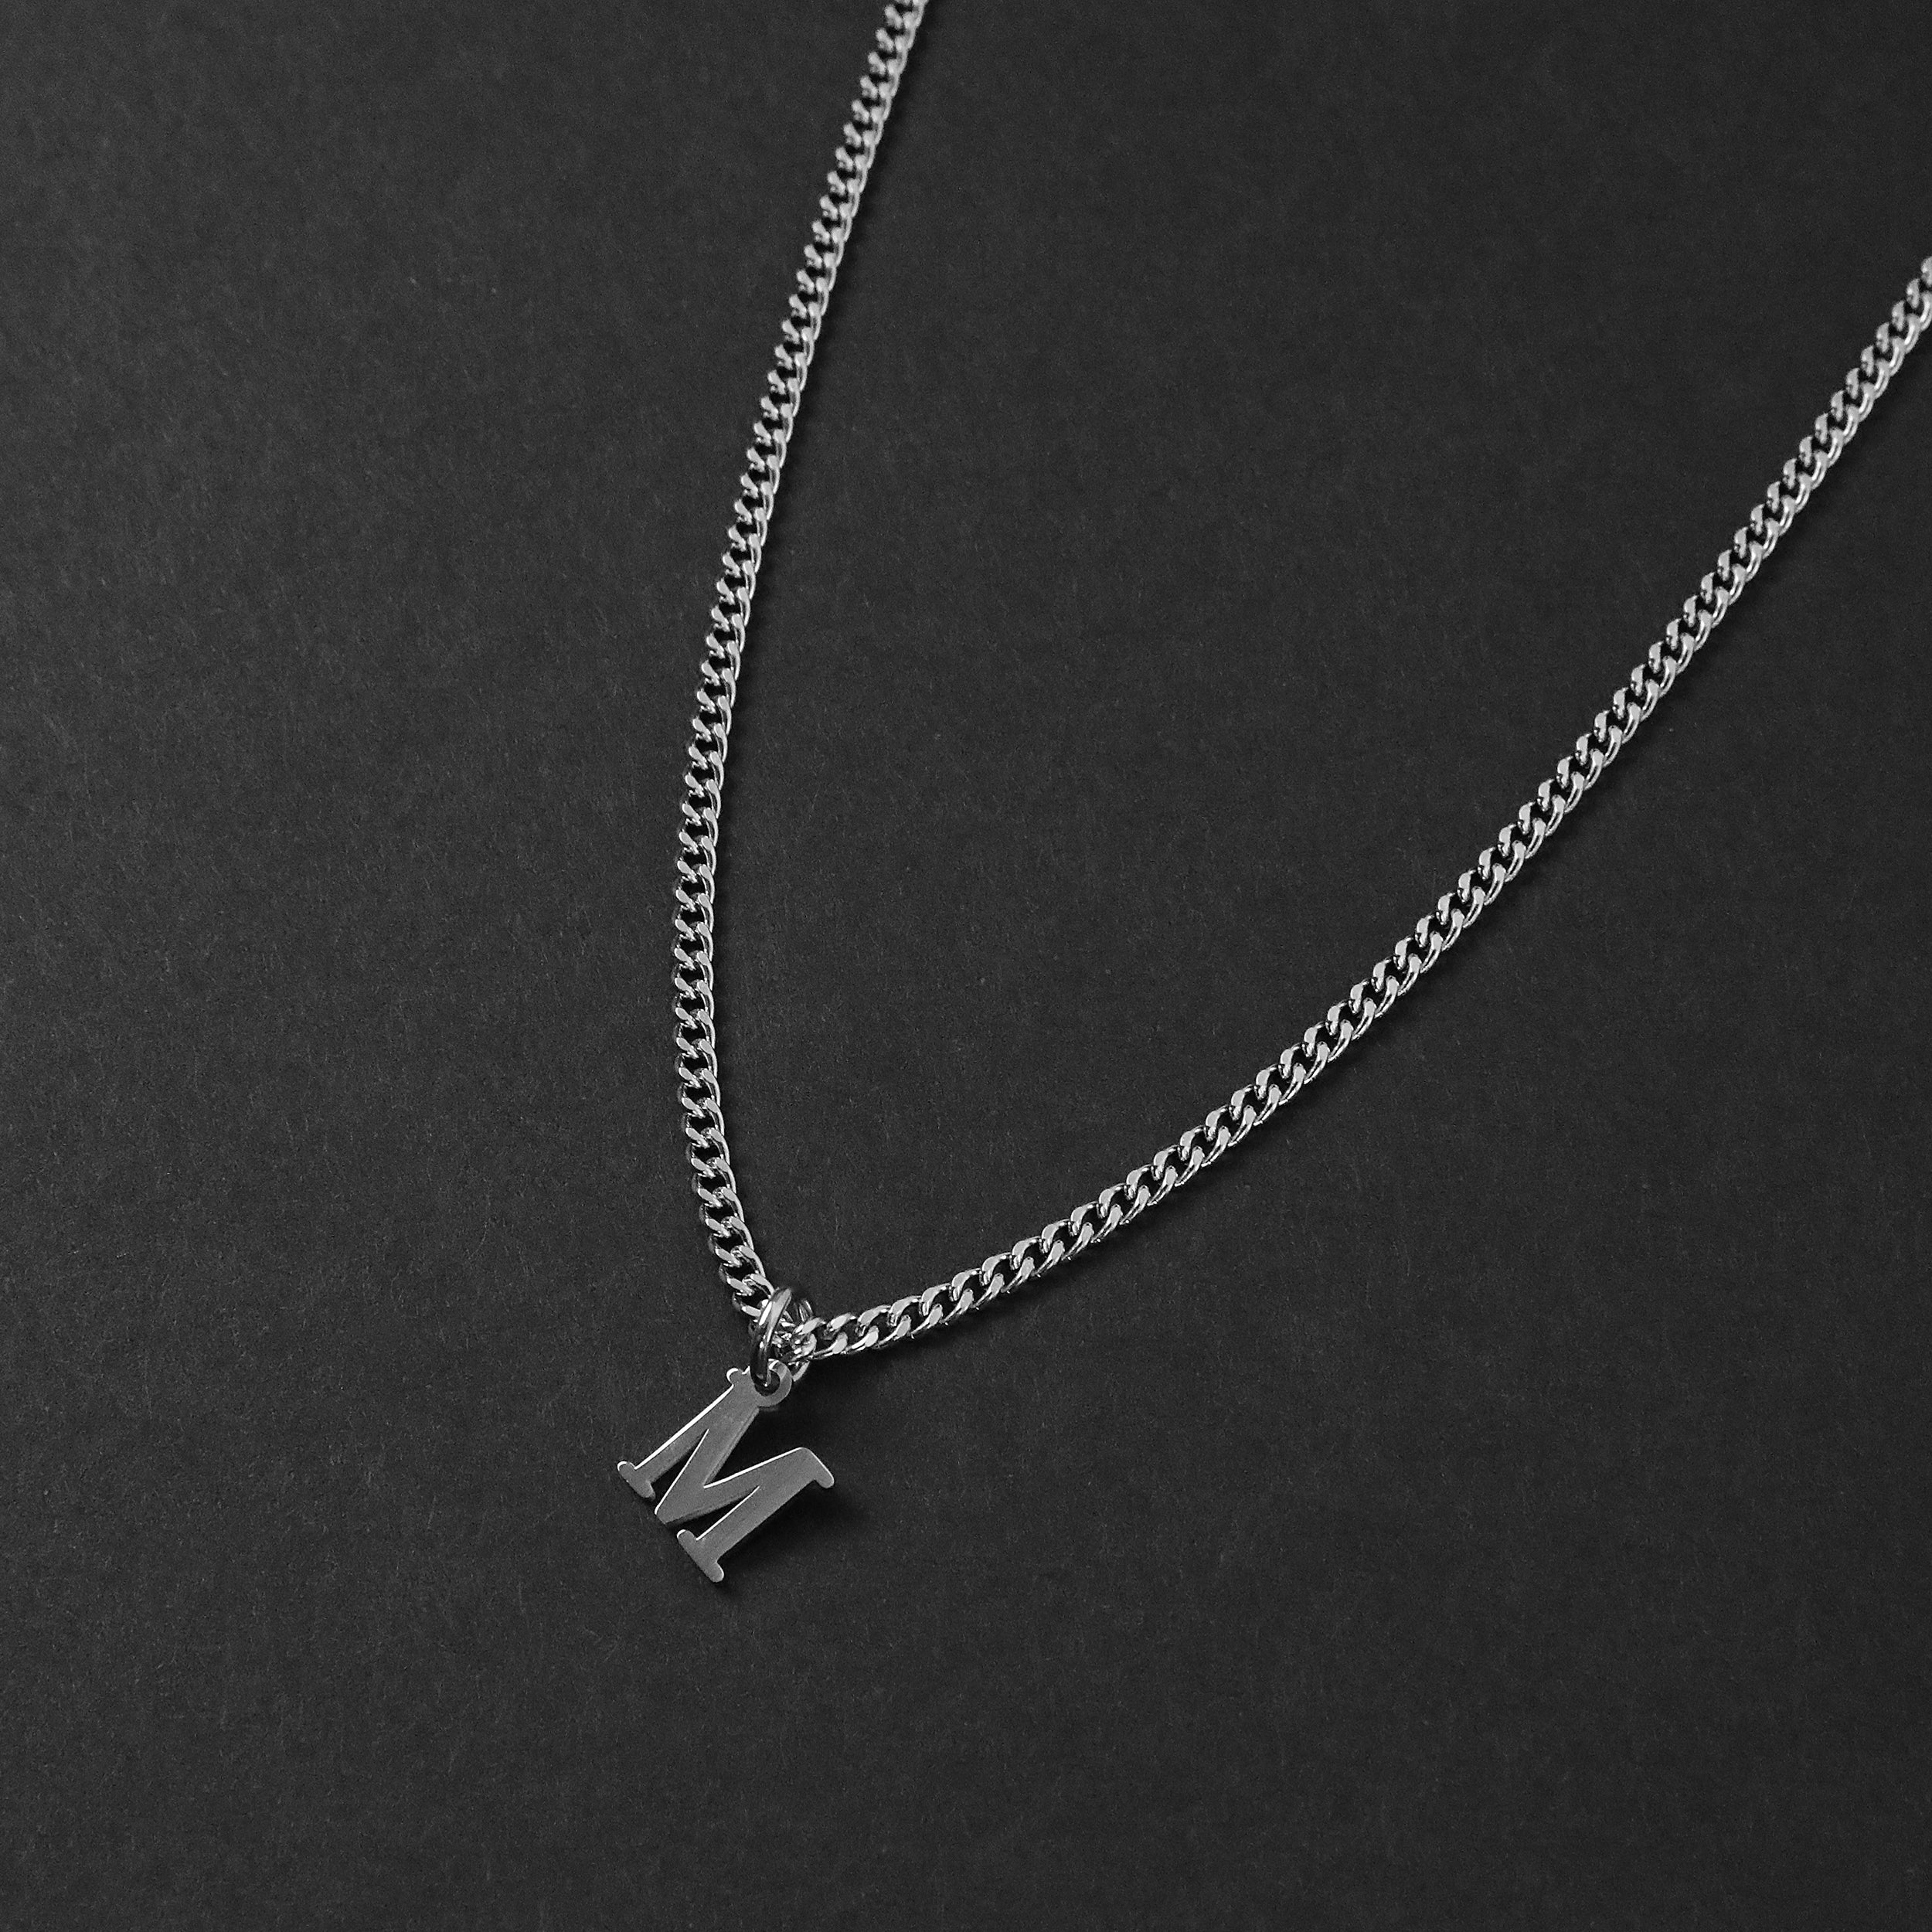 Minimal Initial Necklace - Silver